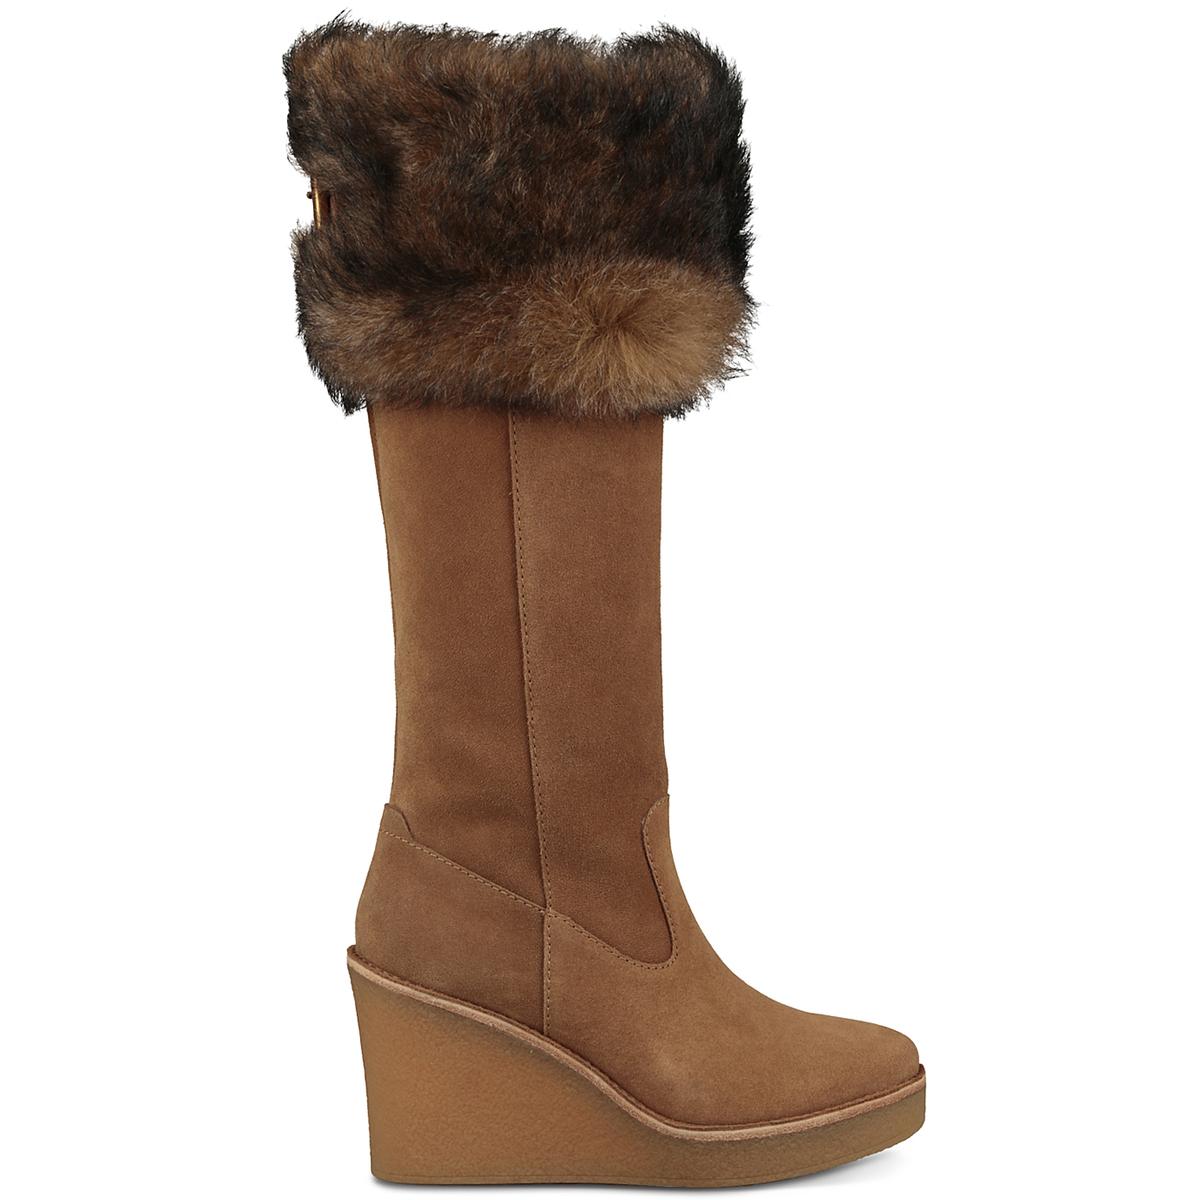 Ugg Womens Valberg Brown Suede Wedge Boots Shoes 8 Medium (B,M) BHFO ...